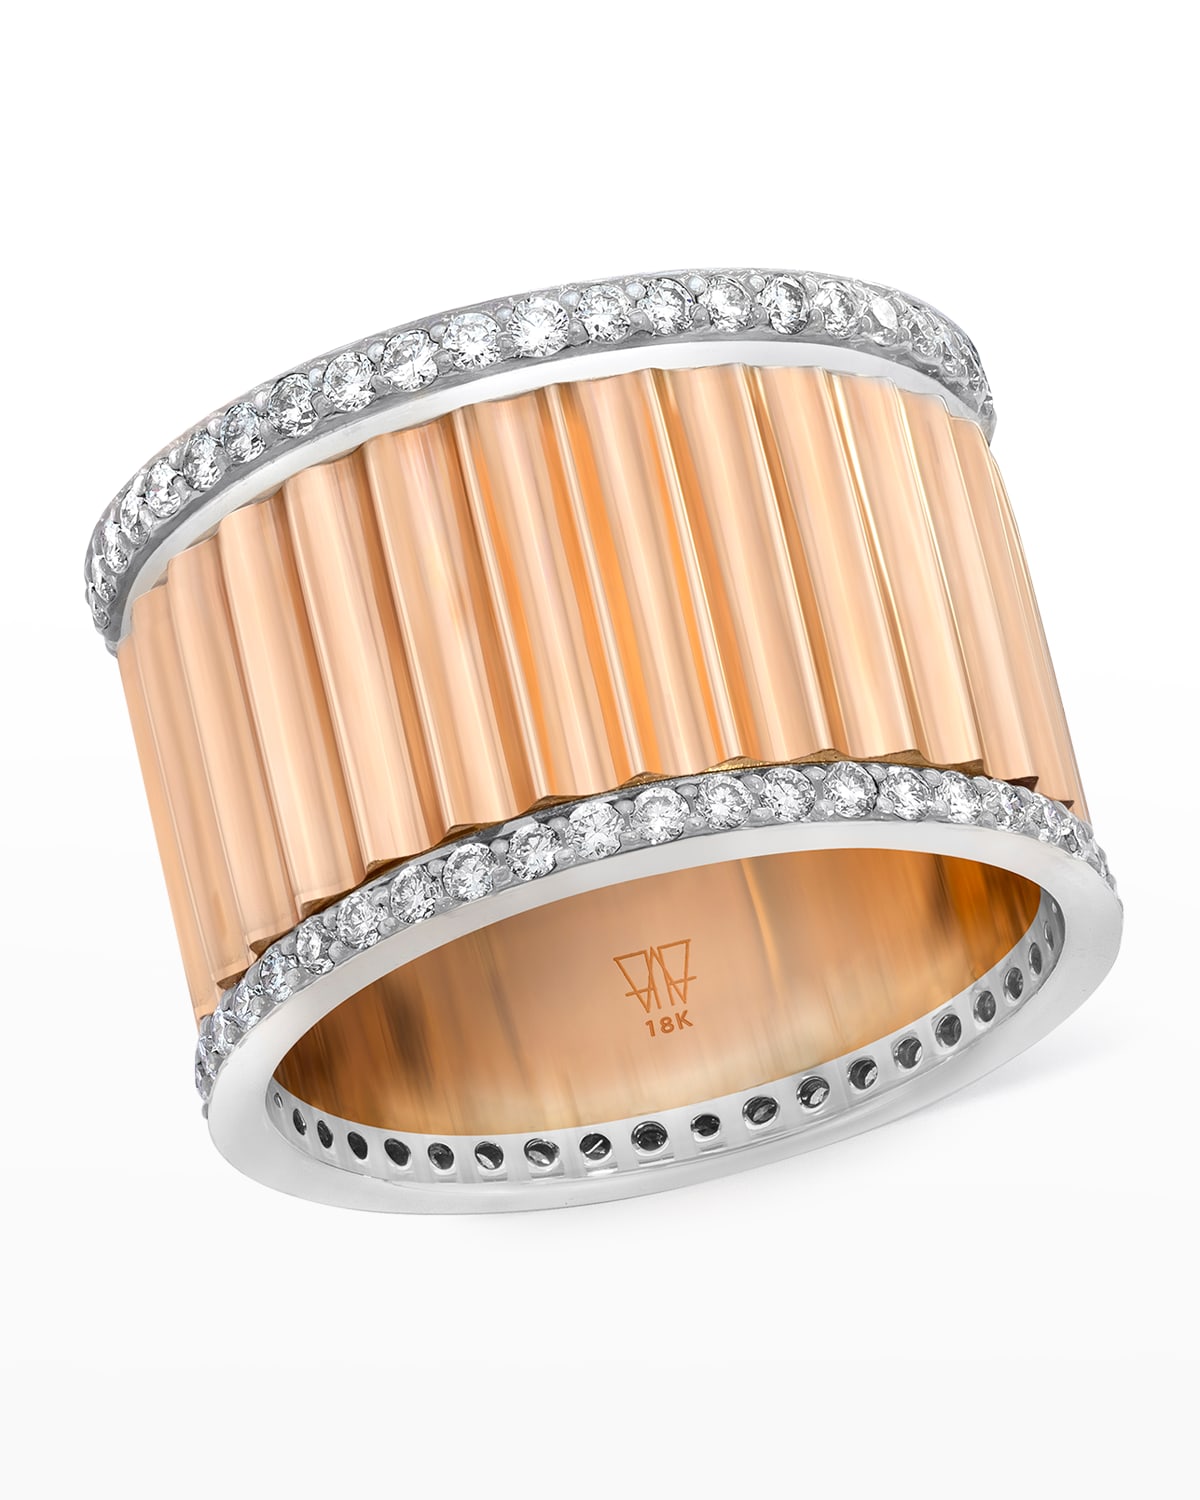 Clive Rose Gold Wide Fluted Band Ring with White Gold and Diamonds